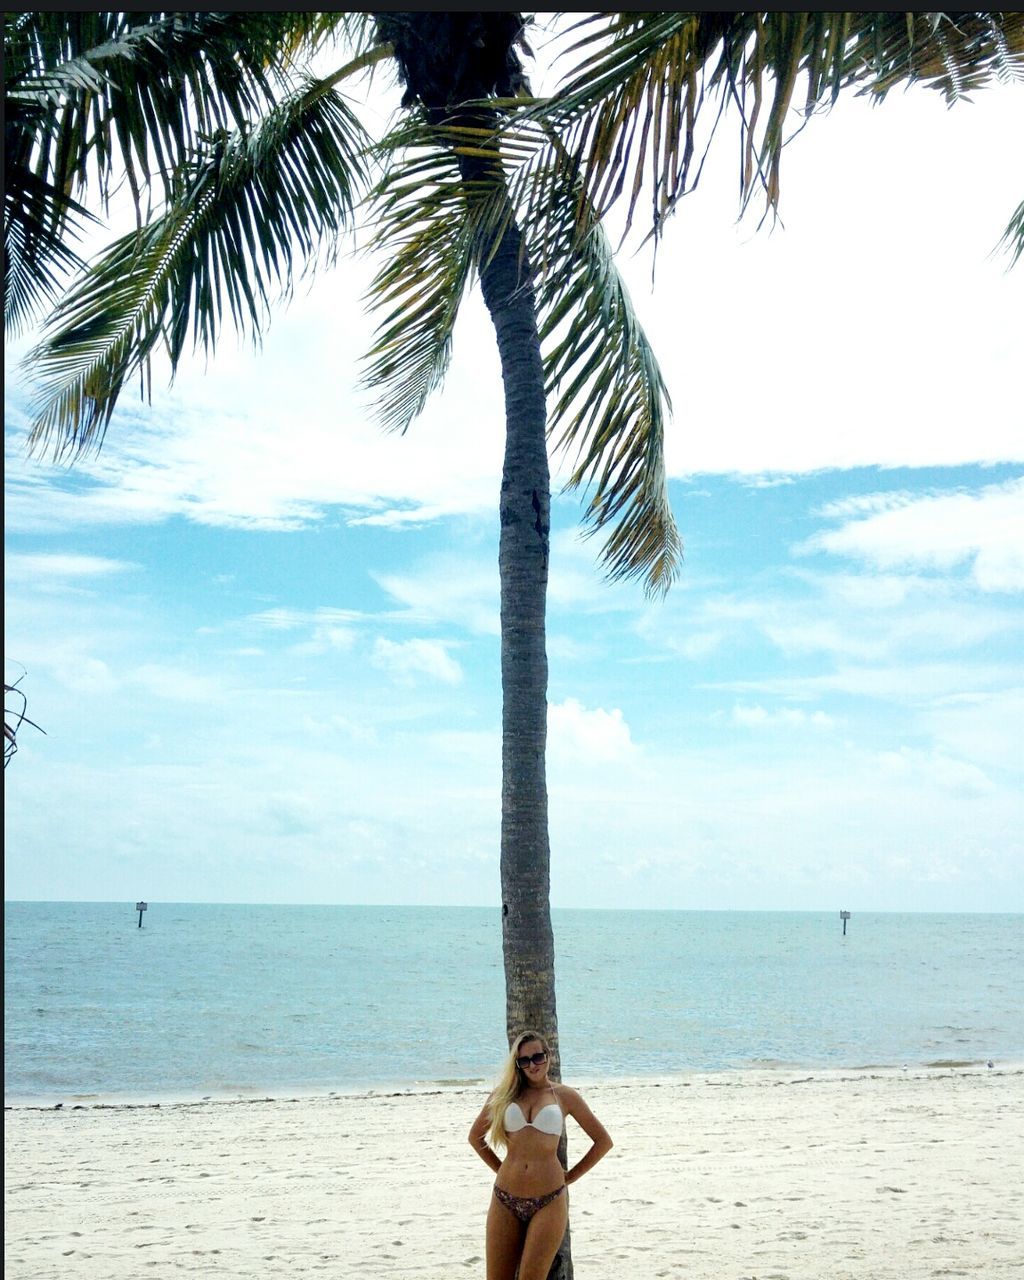 Beautiful woman standing by coconut palm tree at beach against sky